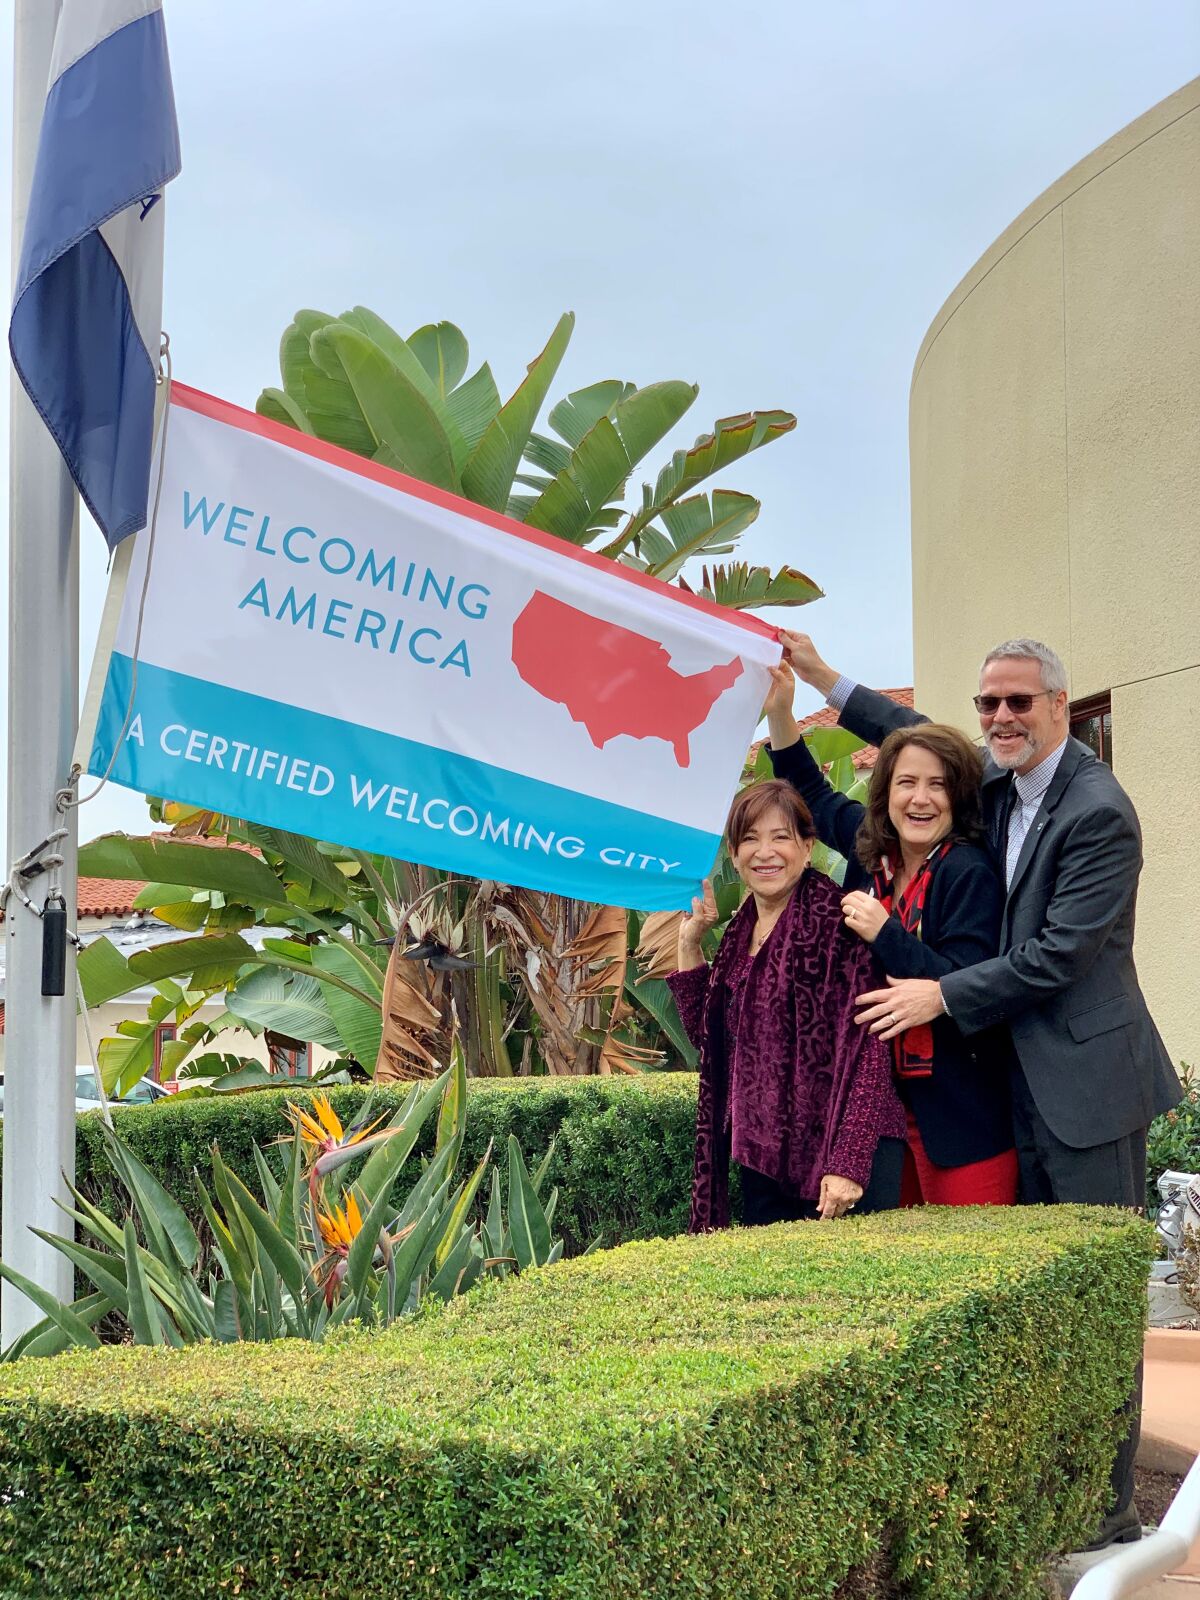 Chula Vista celebrated its designation as a welcoming city on Tuesday, when it raised a flag that honors the recognition